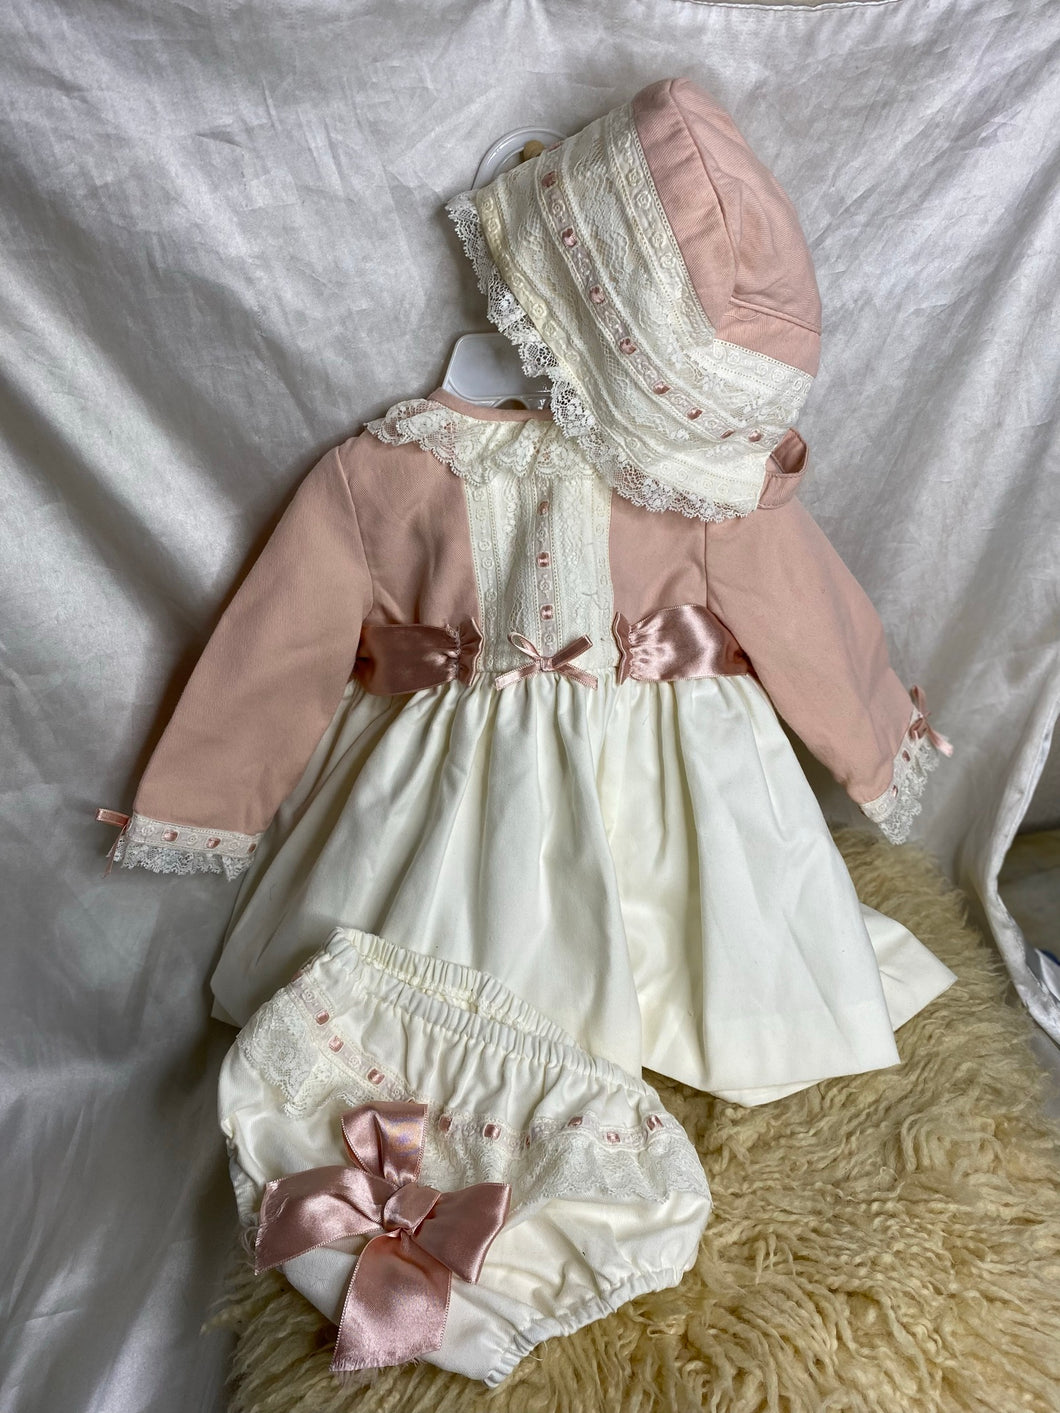 Childrens' Salon Dolce Petit Pink and Cream Exquisite Formal Bonnet, Dress and Pants - Girls 9 Months